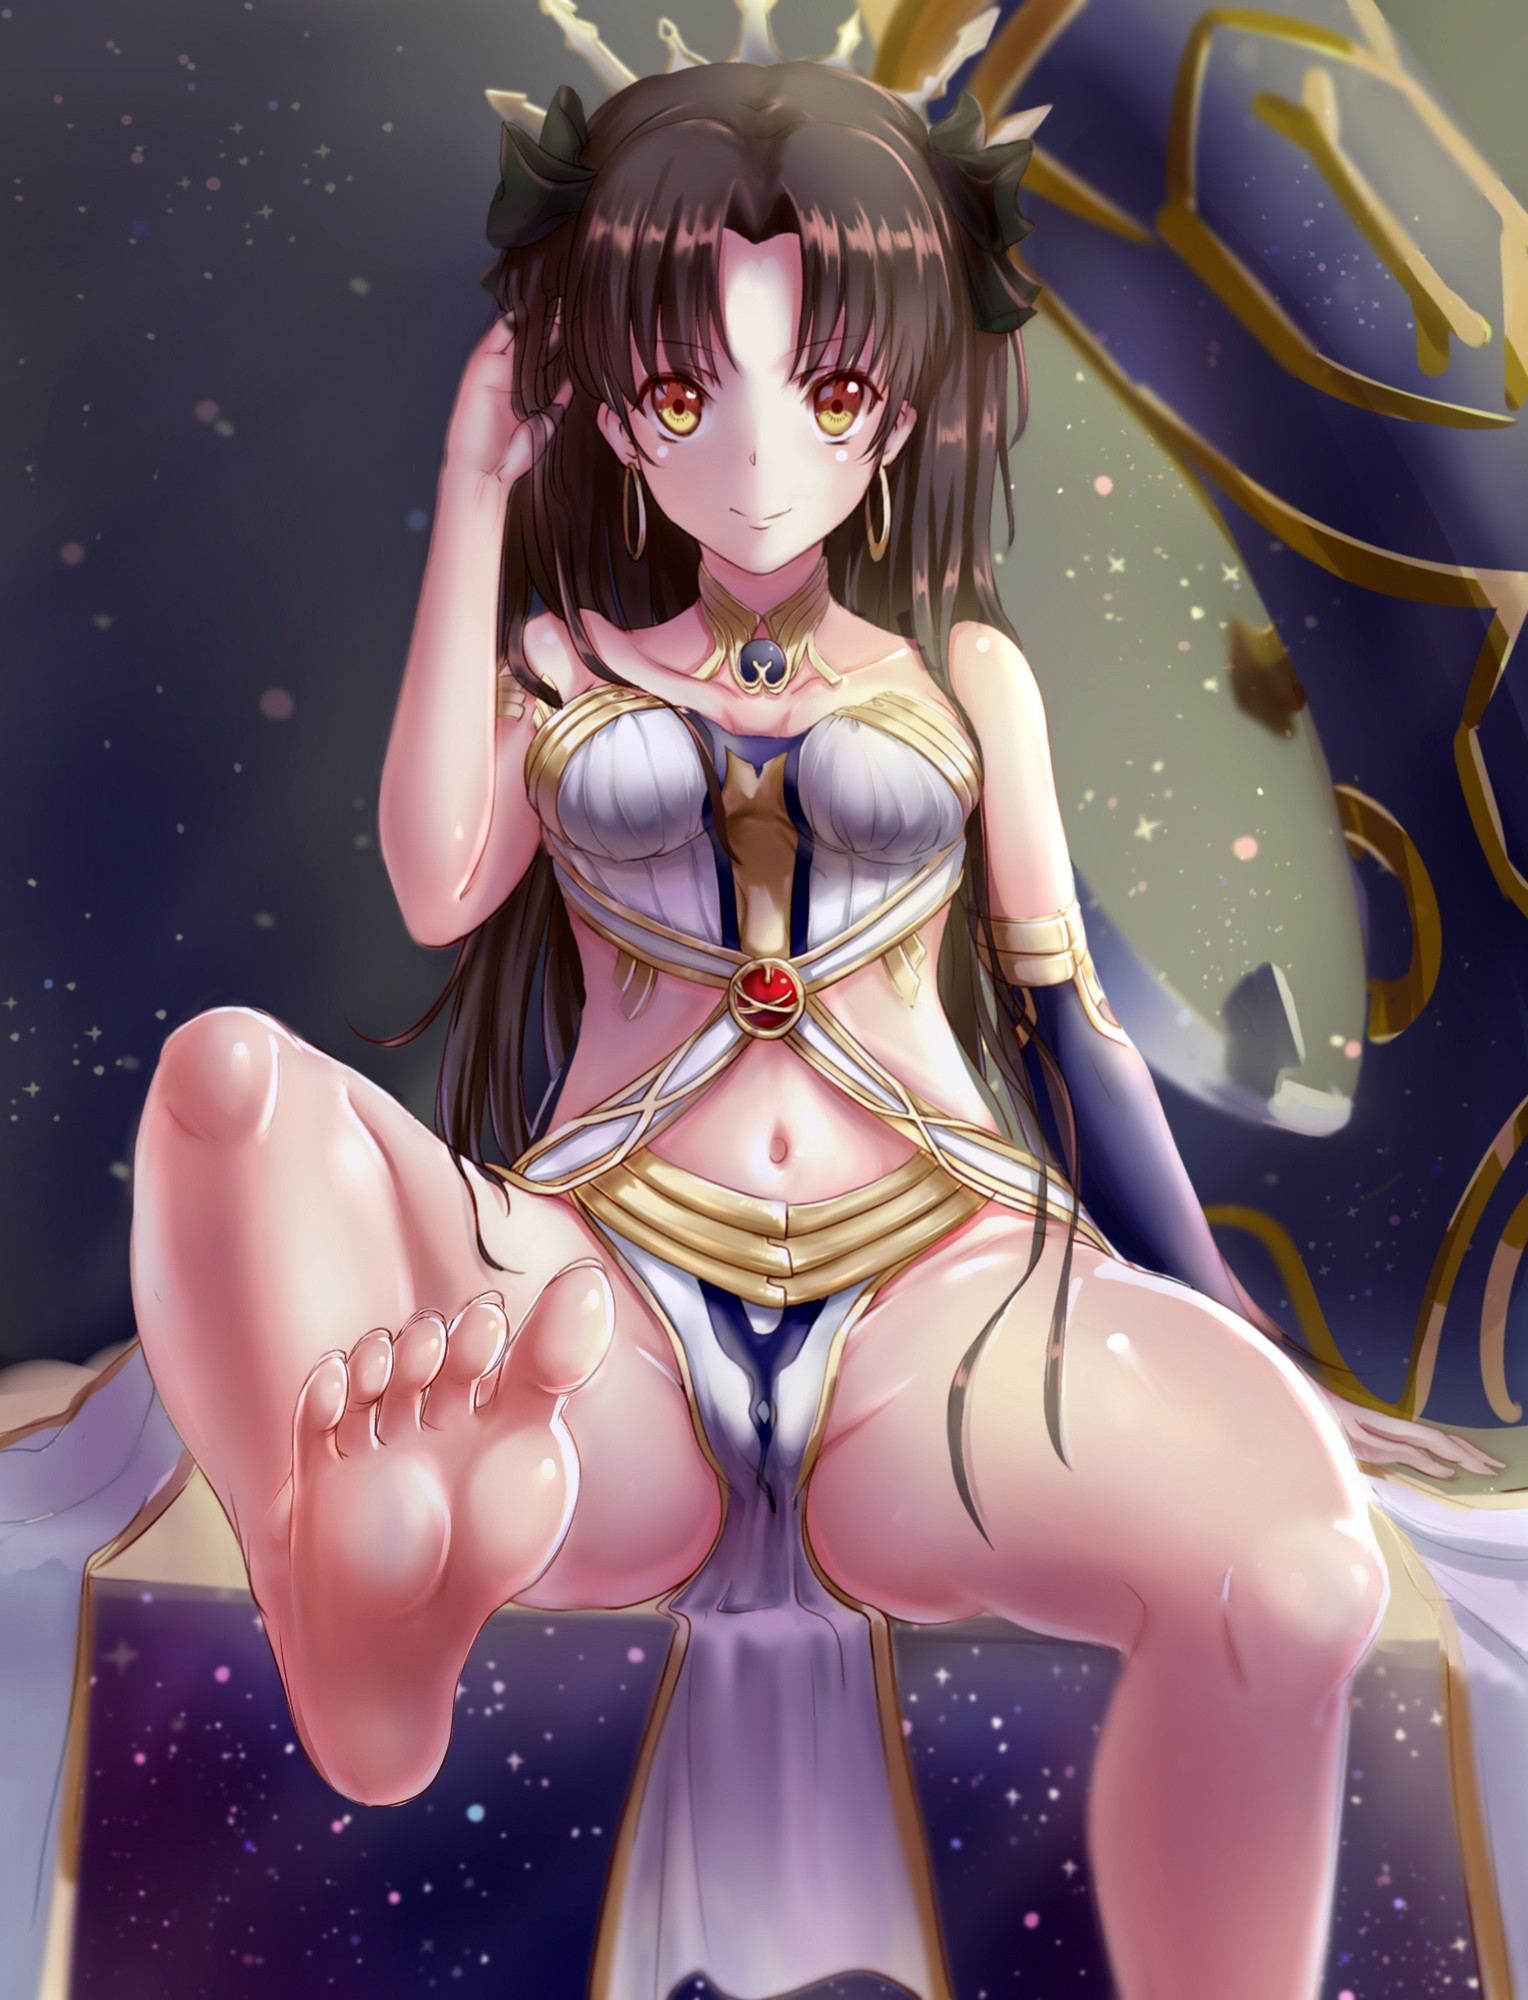 Warrior Sex Fantasy Gif Hentai - Alone The Woman Warrior And The Witch Of The Fantasy World Are Wearing  Well, And It Is è ±æƒ‘ã®åˆ» Clothes With \